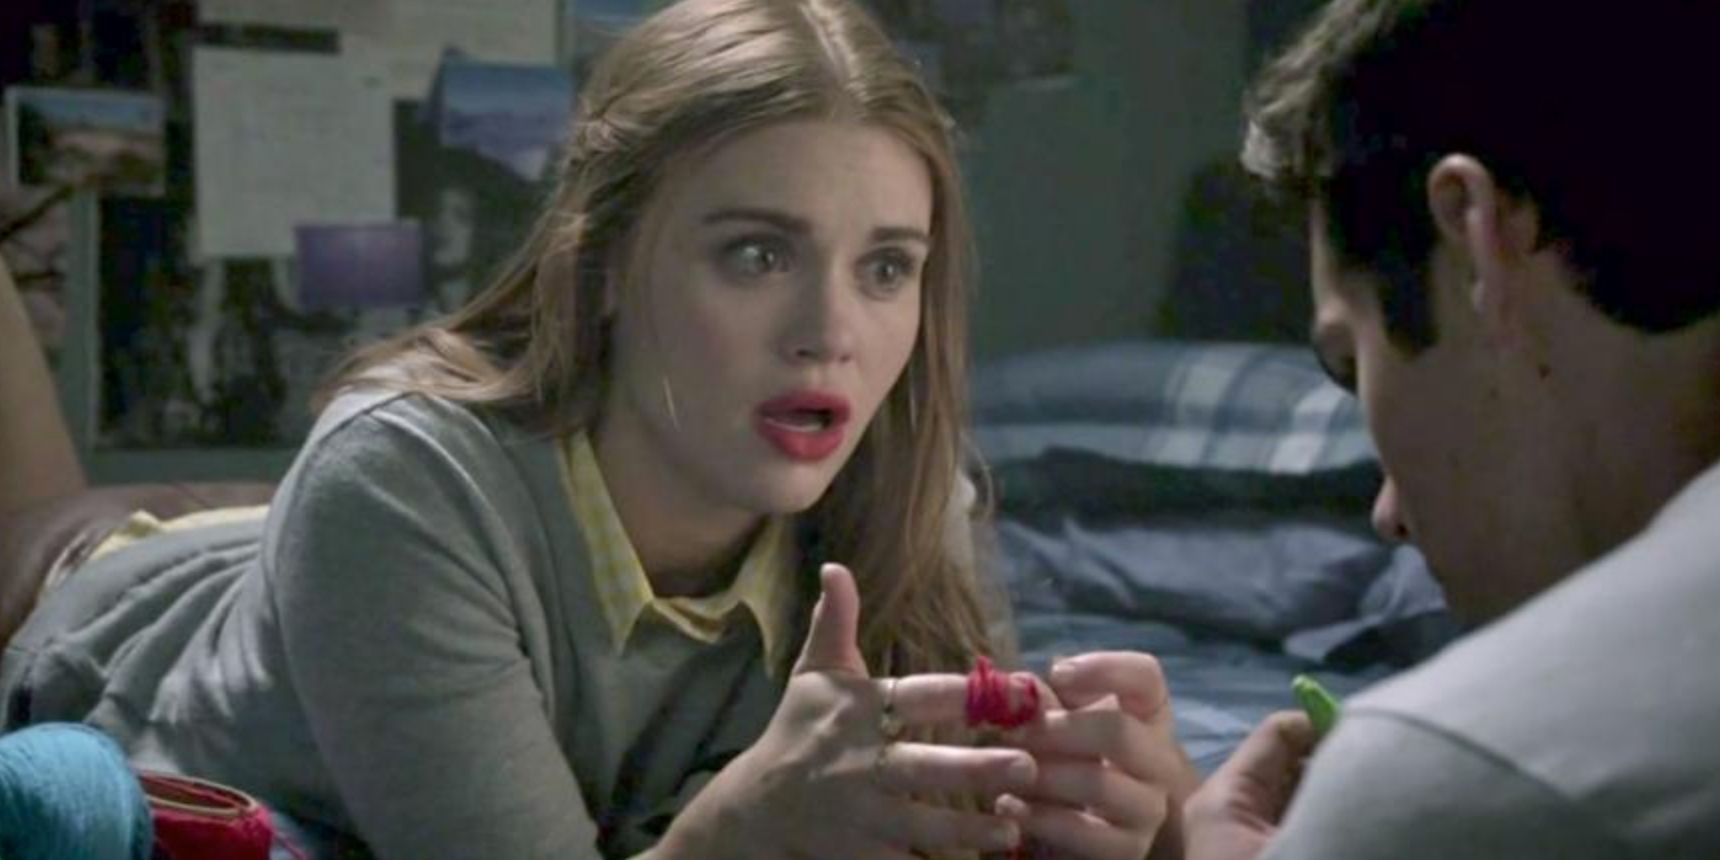 Lydia listens to Stiles while twisting red yarn in Teen Wolf